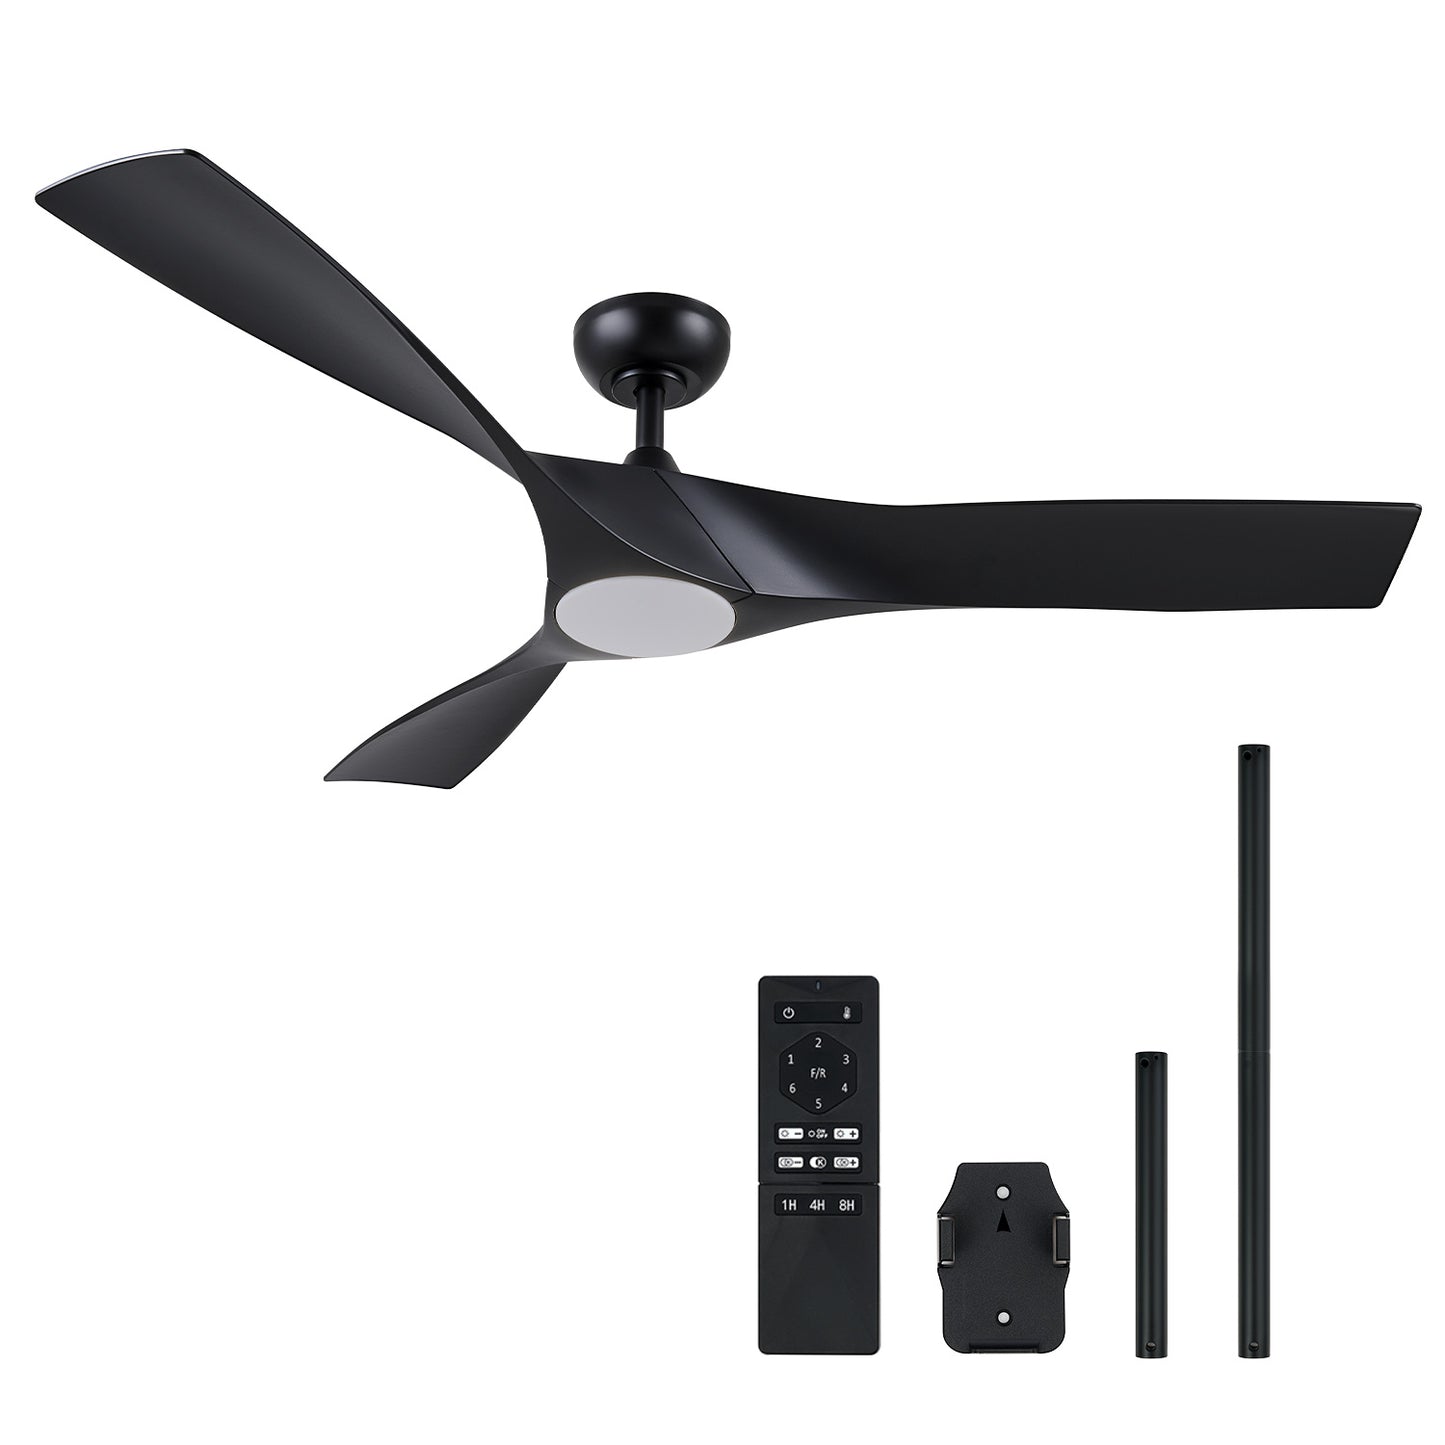 Bestco 52" Ceiling Fan with Lights 3 Blades Remote Control Timer and Adjustable Height for Bedroom Living Room Kitchen Decor More